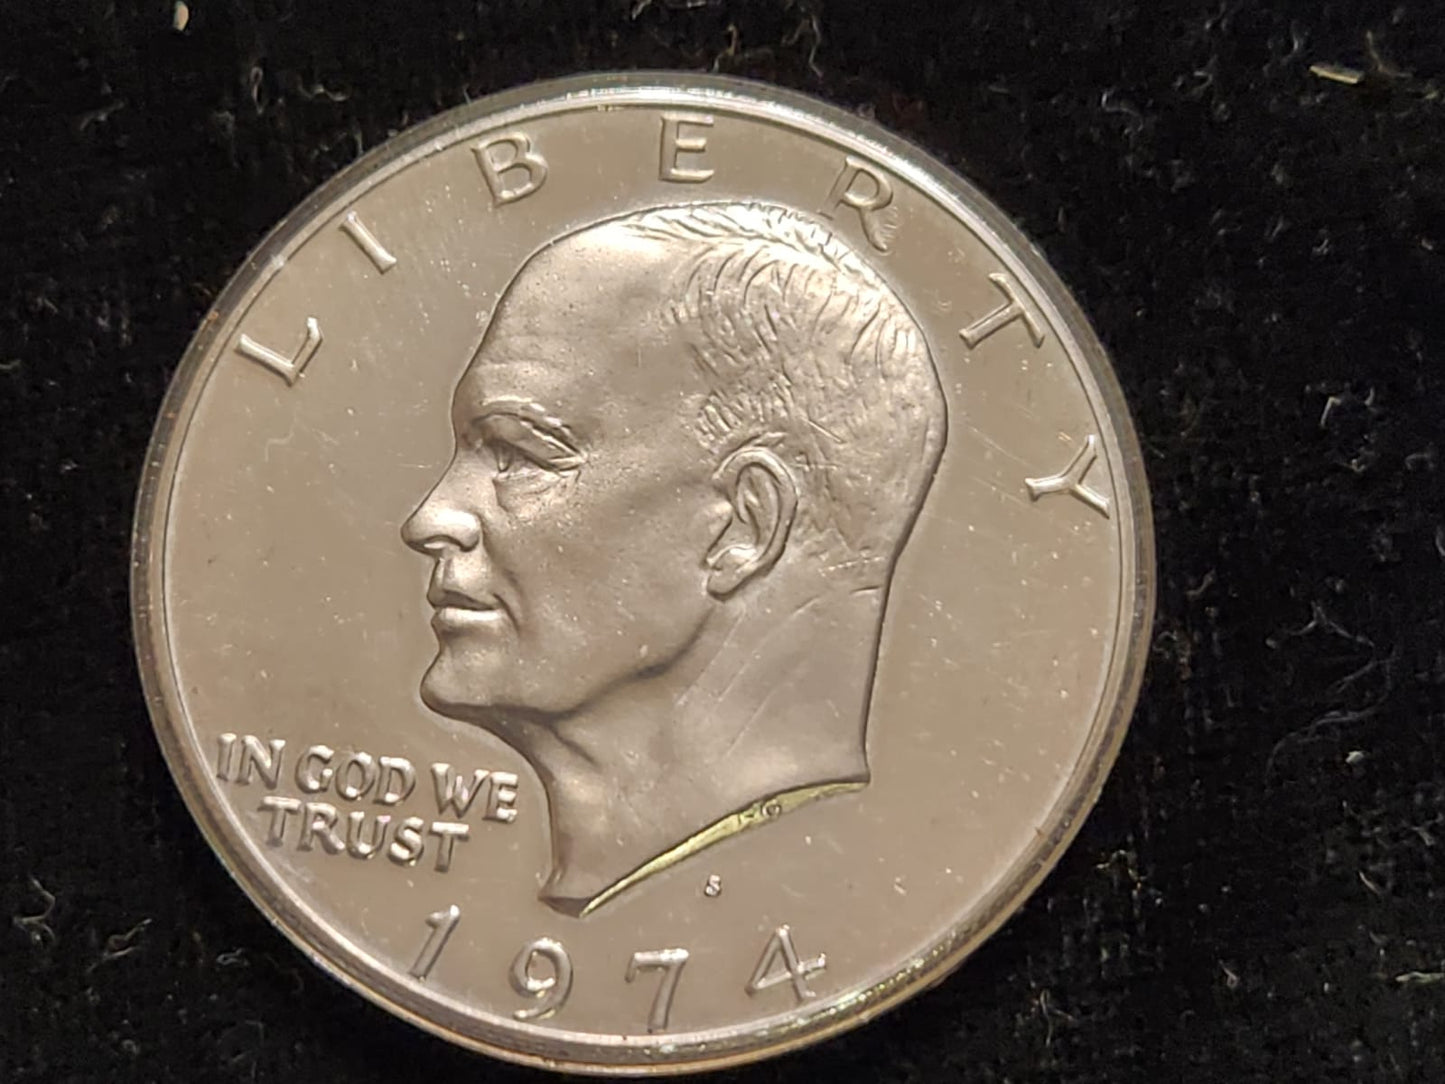 Clearance almost mint 4 coins $1 ،Eisenhower & J.kennendy.CB3Y                